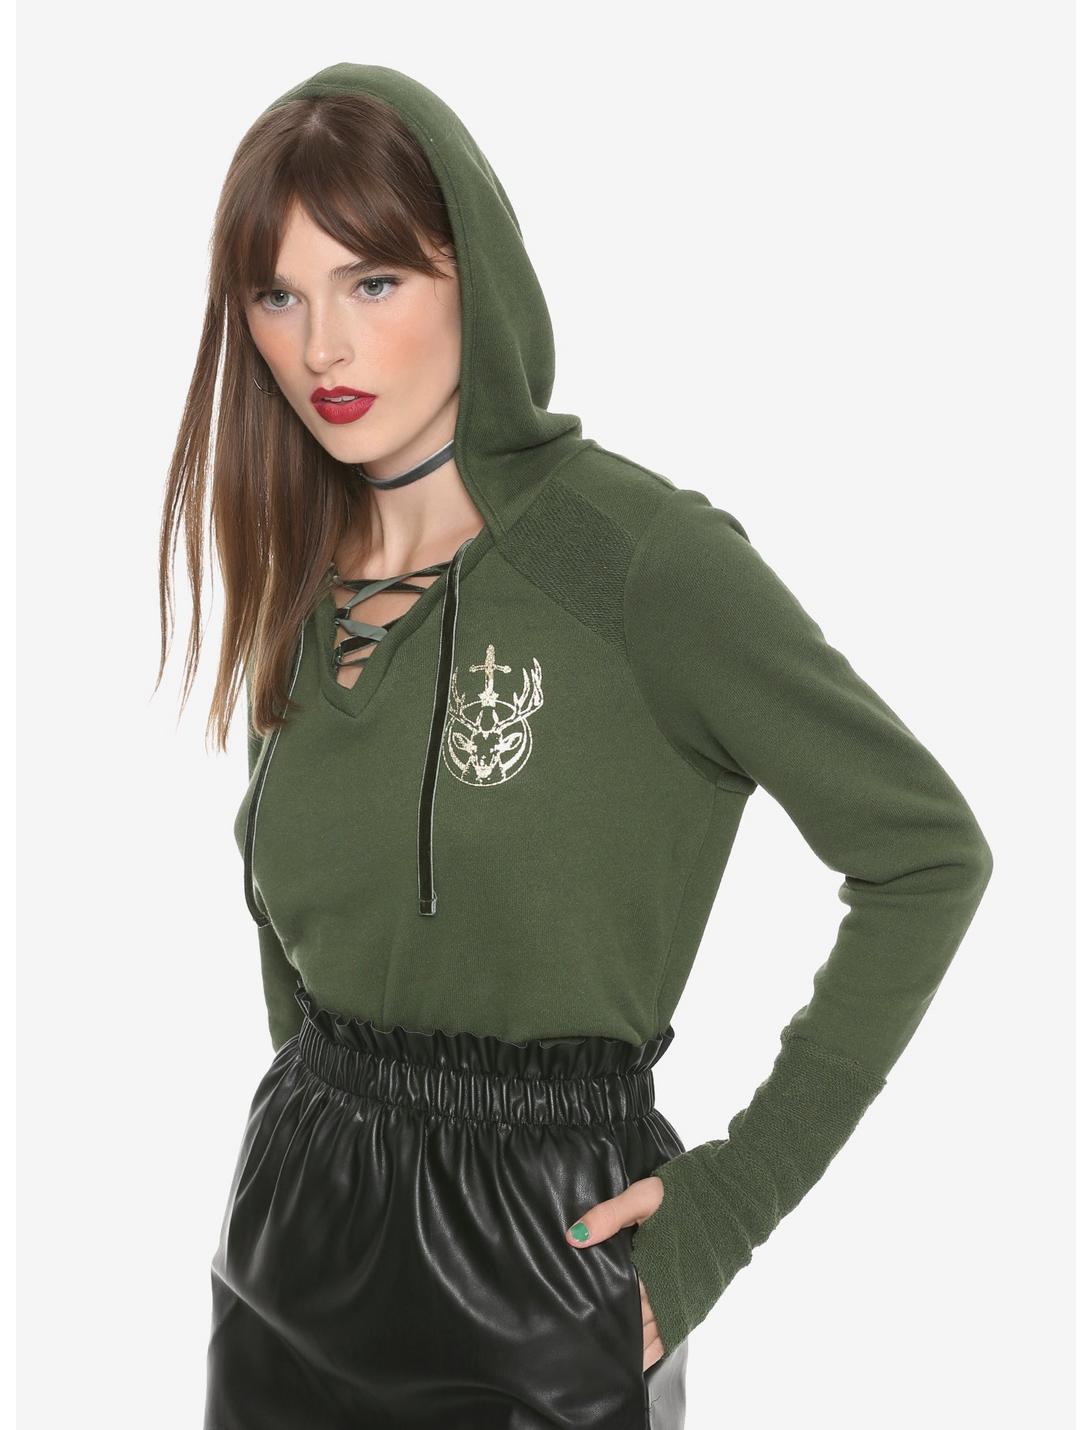 Outlander Lace-Up Girls Hoodie Hot Topic Exclusive, DARK GREEN, hi-res